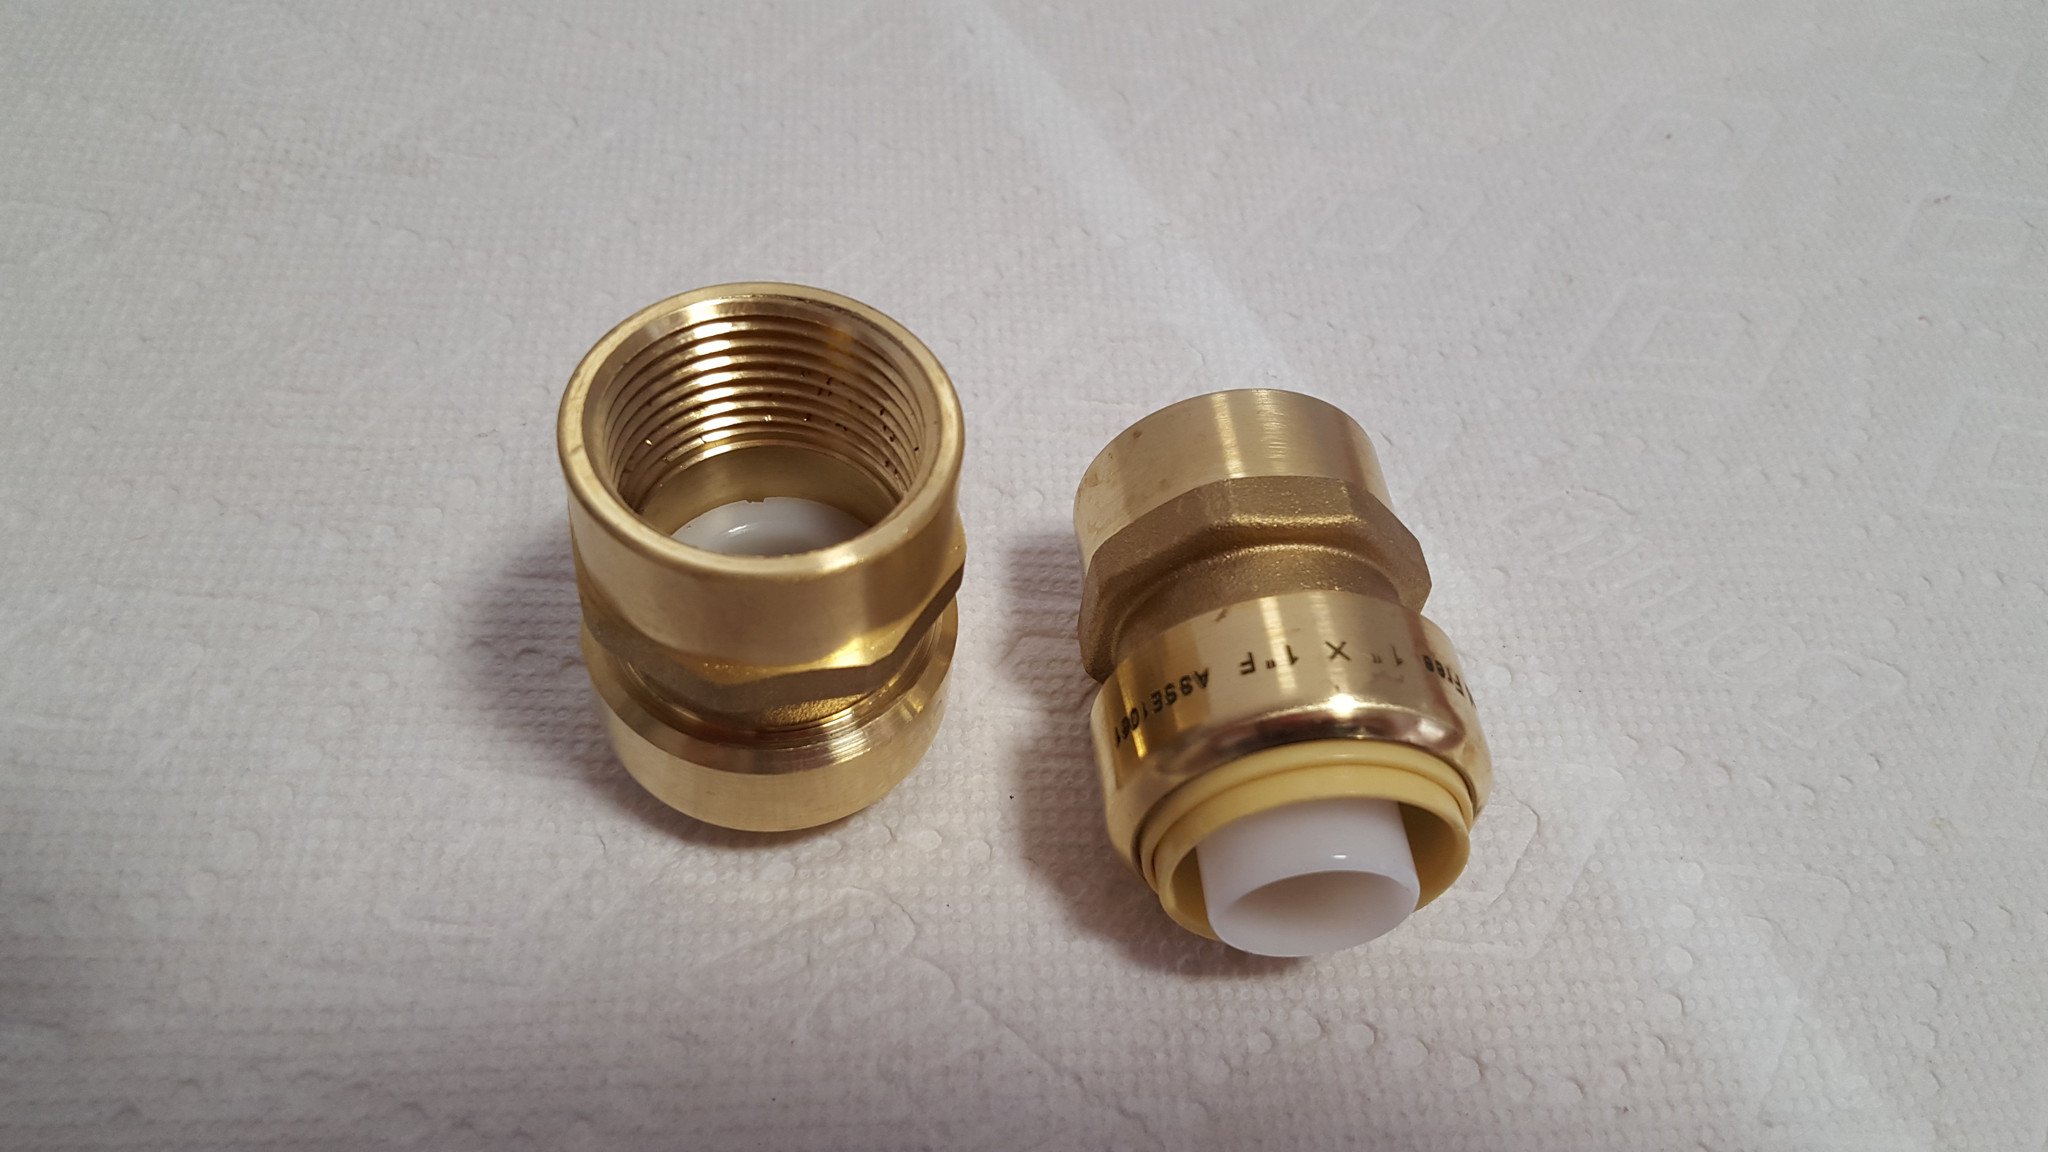 1/2" FPT (Female Pipe Thread) Push Fitting